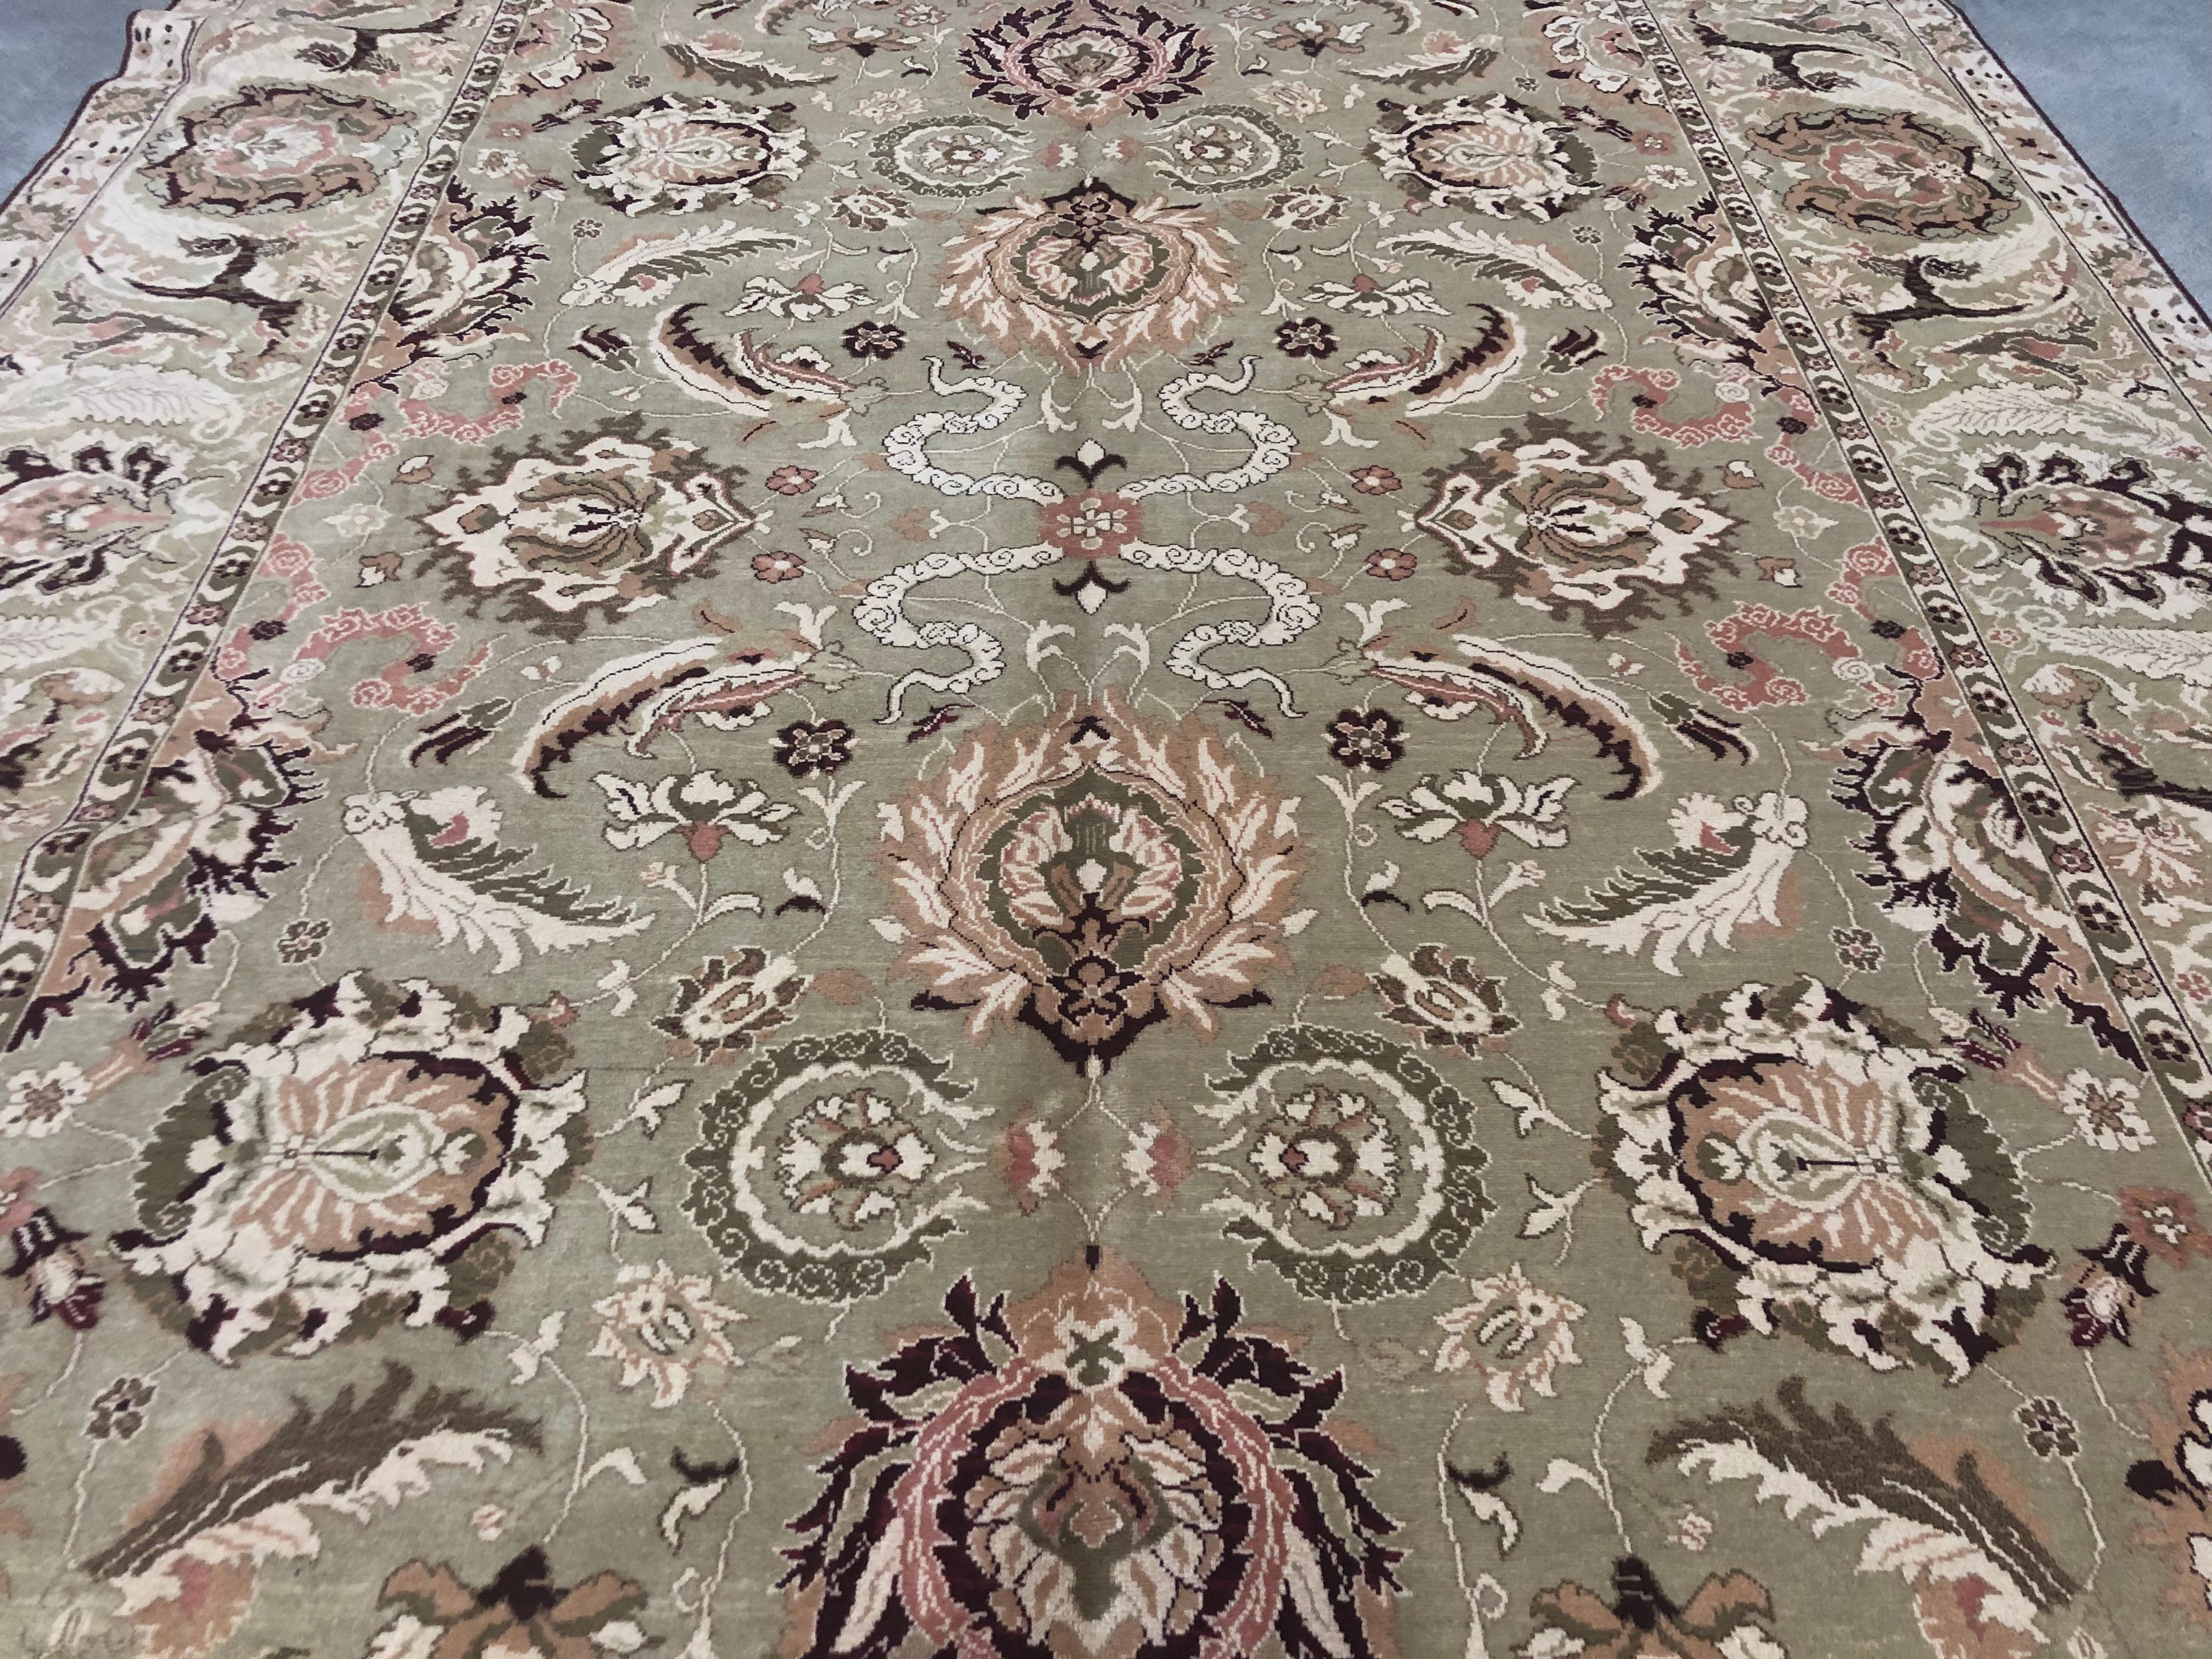 A dazzling floral motif in red, coral, cream and olive tones swirls across a beige background in this stunning Agra style Egyptian area rug. Floral ribbons define and frame the space in which feather-light flowers and leaves swirl. The Agra style at